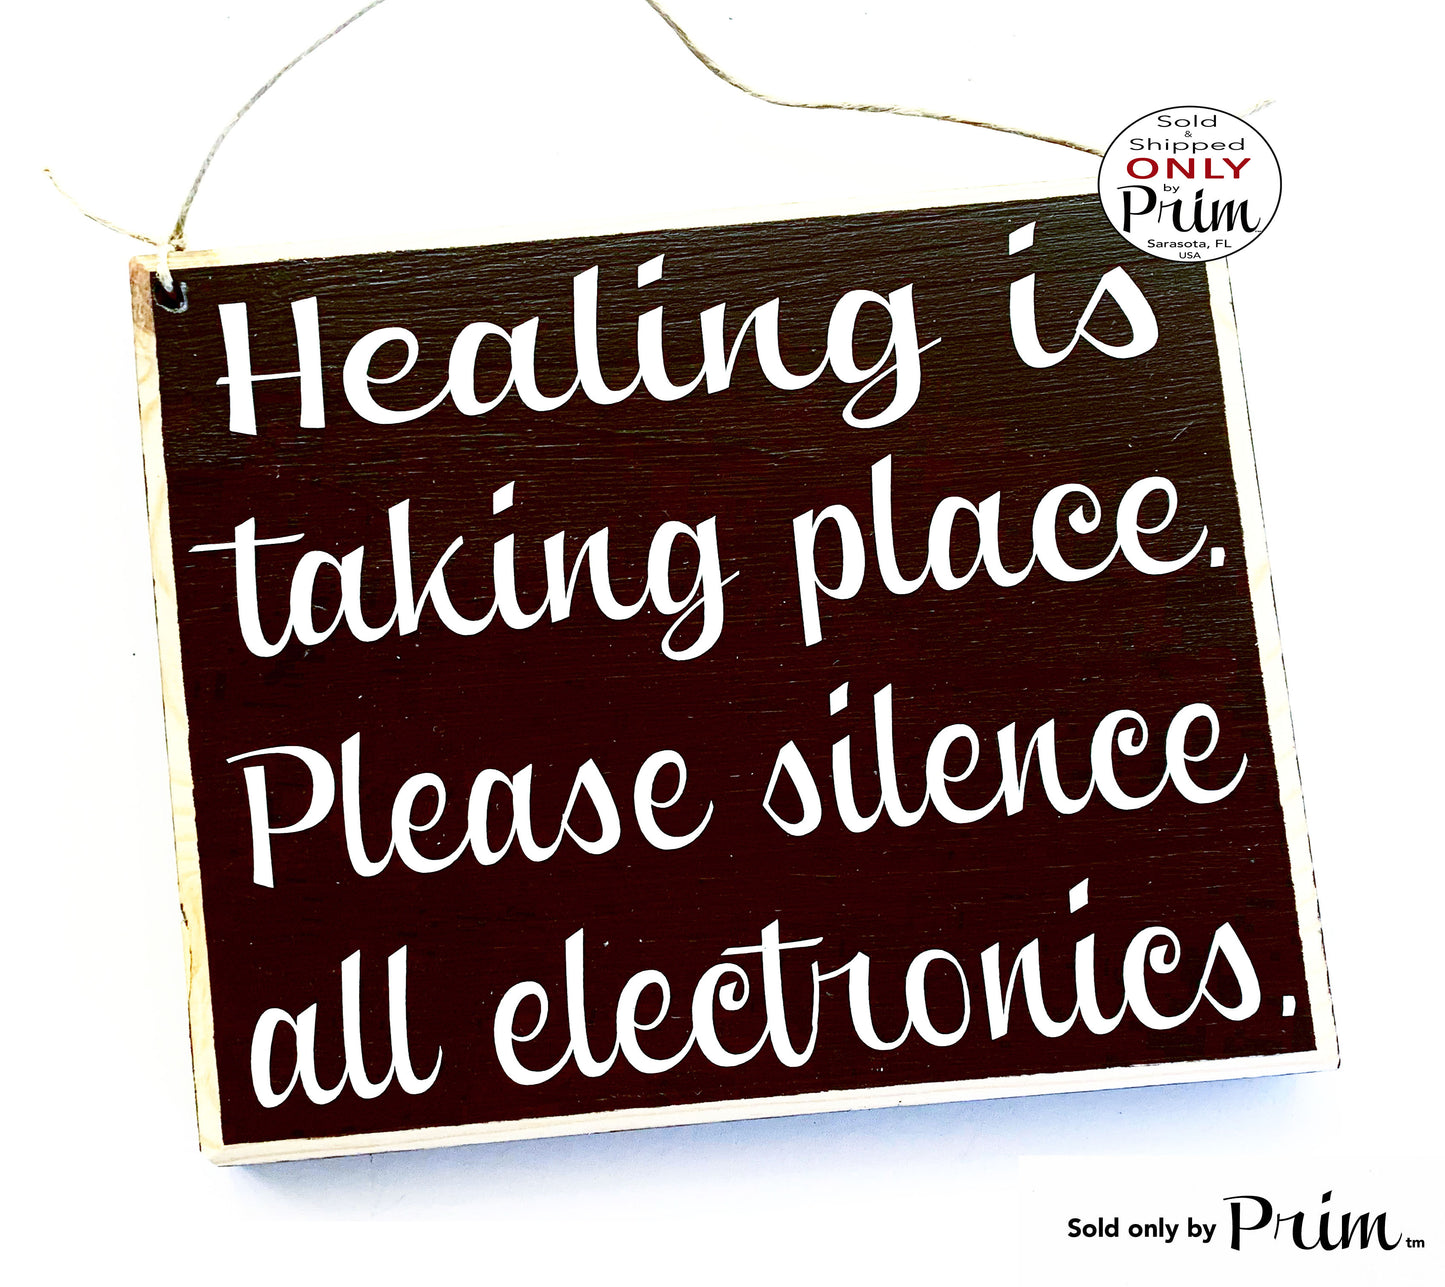 8x8 Healing is taking place Please silence all electronics Custom Wood Sign | No Cellphones Quiet Voices Shhh No Phones Spa Salon Plaque